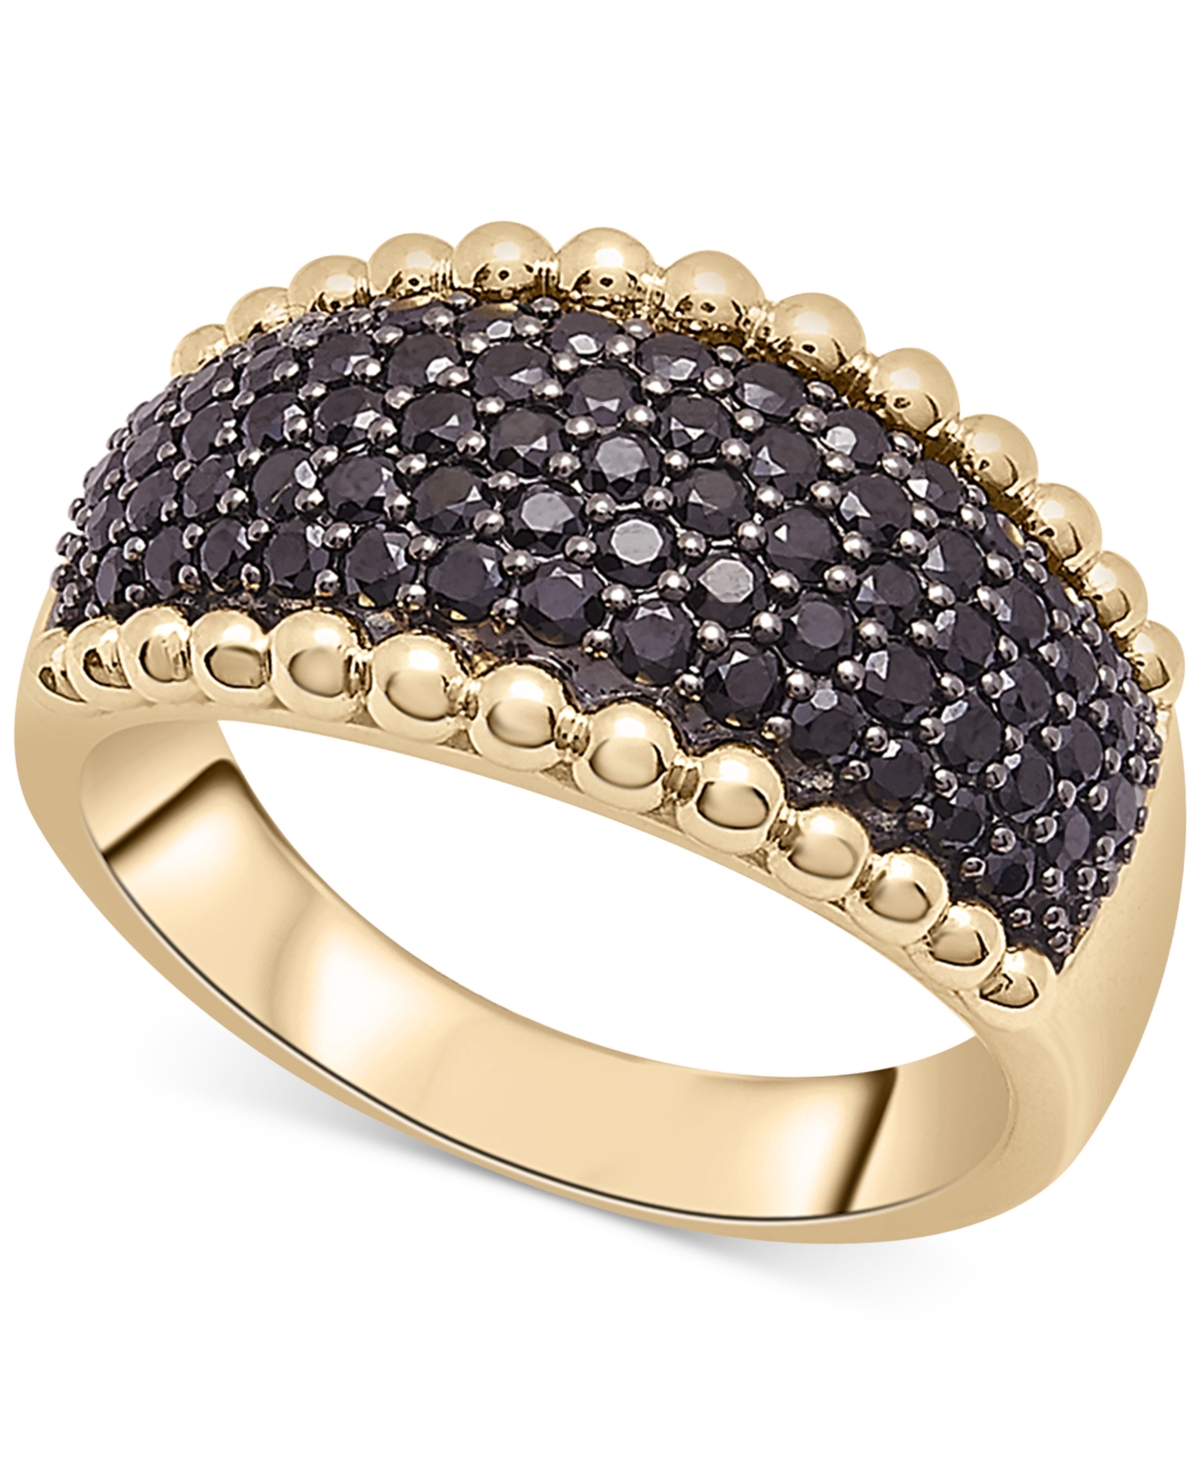 Black Diamond Bead Edge Ring (1 ct. t.w.) in 14k Gold, Created for Macy's - Yellow Gold